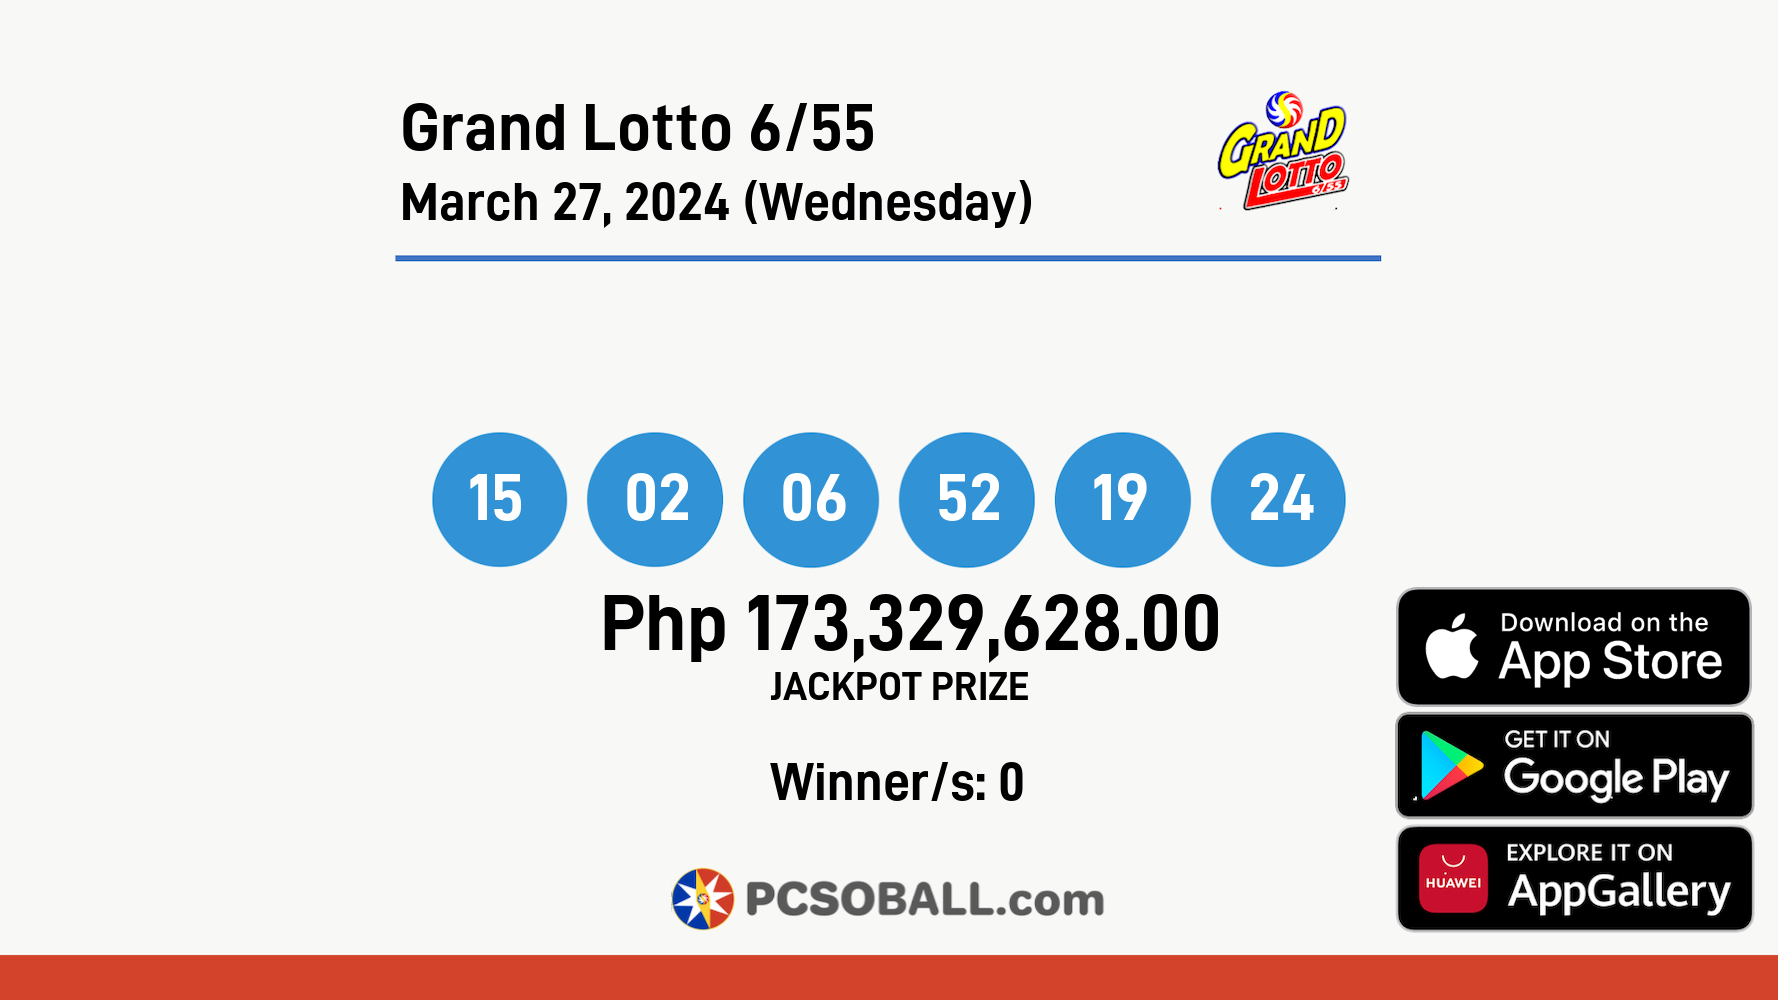 Grand Lotto 6/55 March 27, 2024 (Wednesday) Result